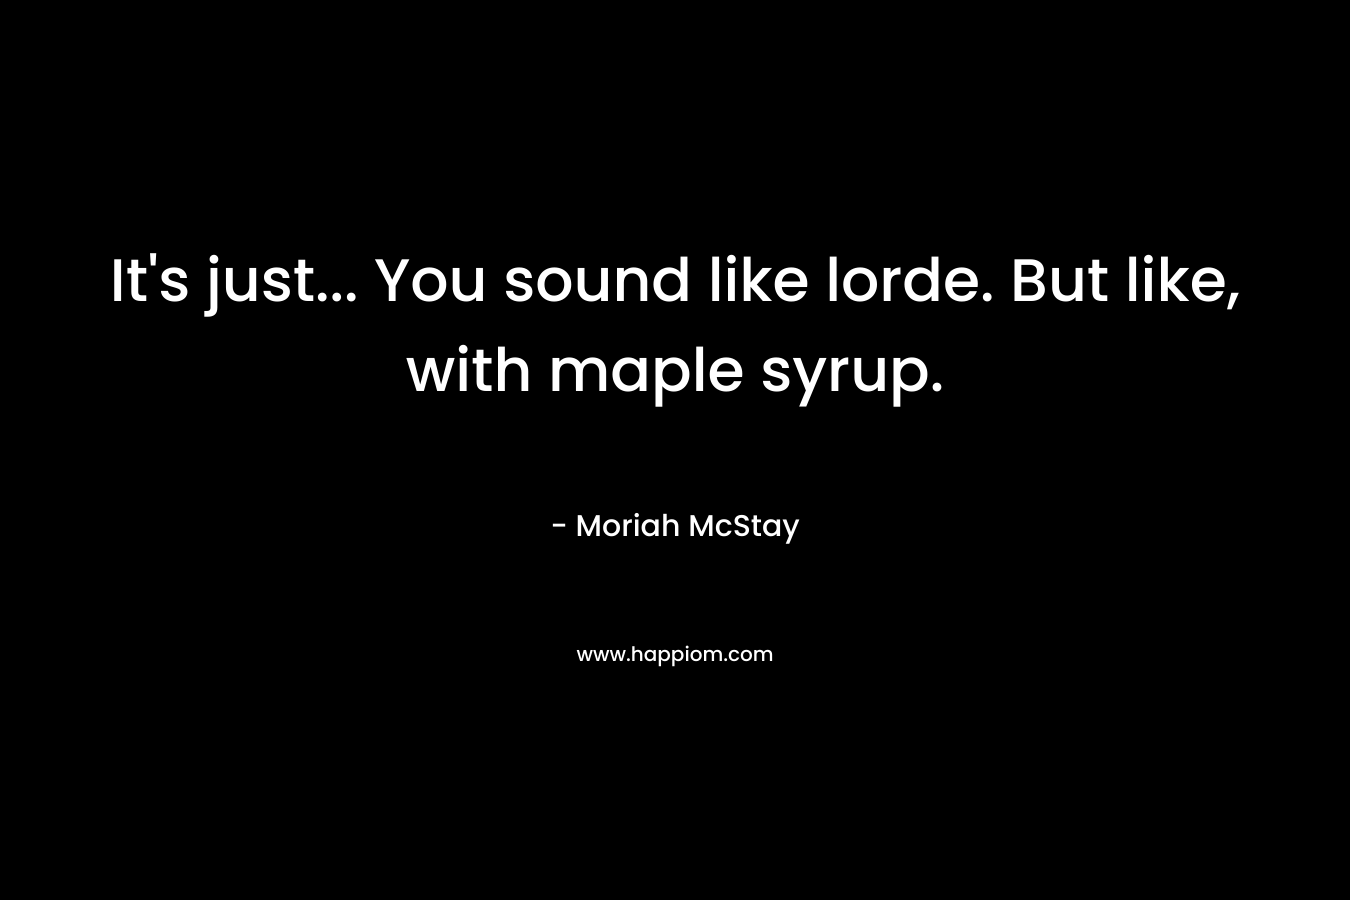 It's just... You sound like lorde. But like, with maple syrup.